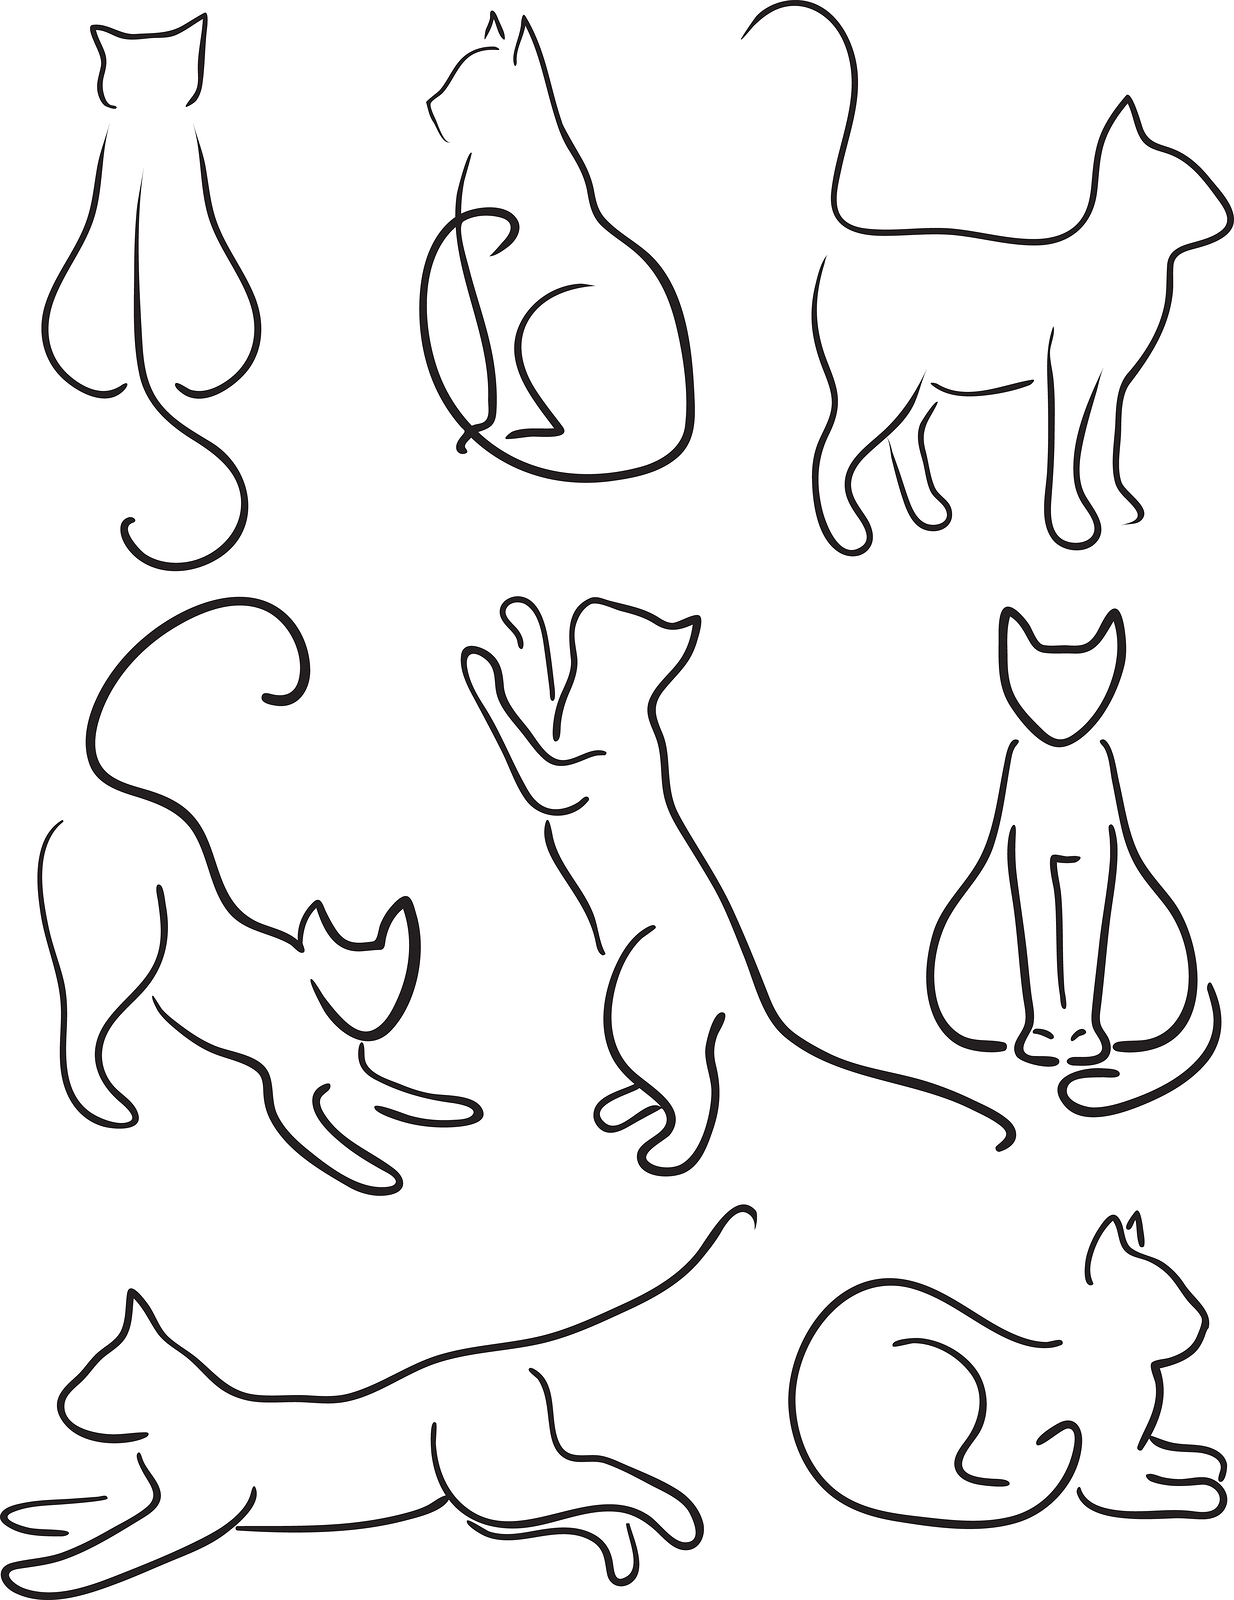 clip art line drawing of a cat - photo #10